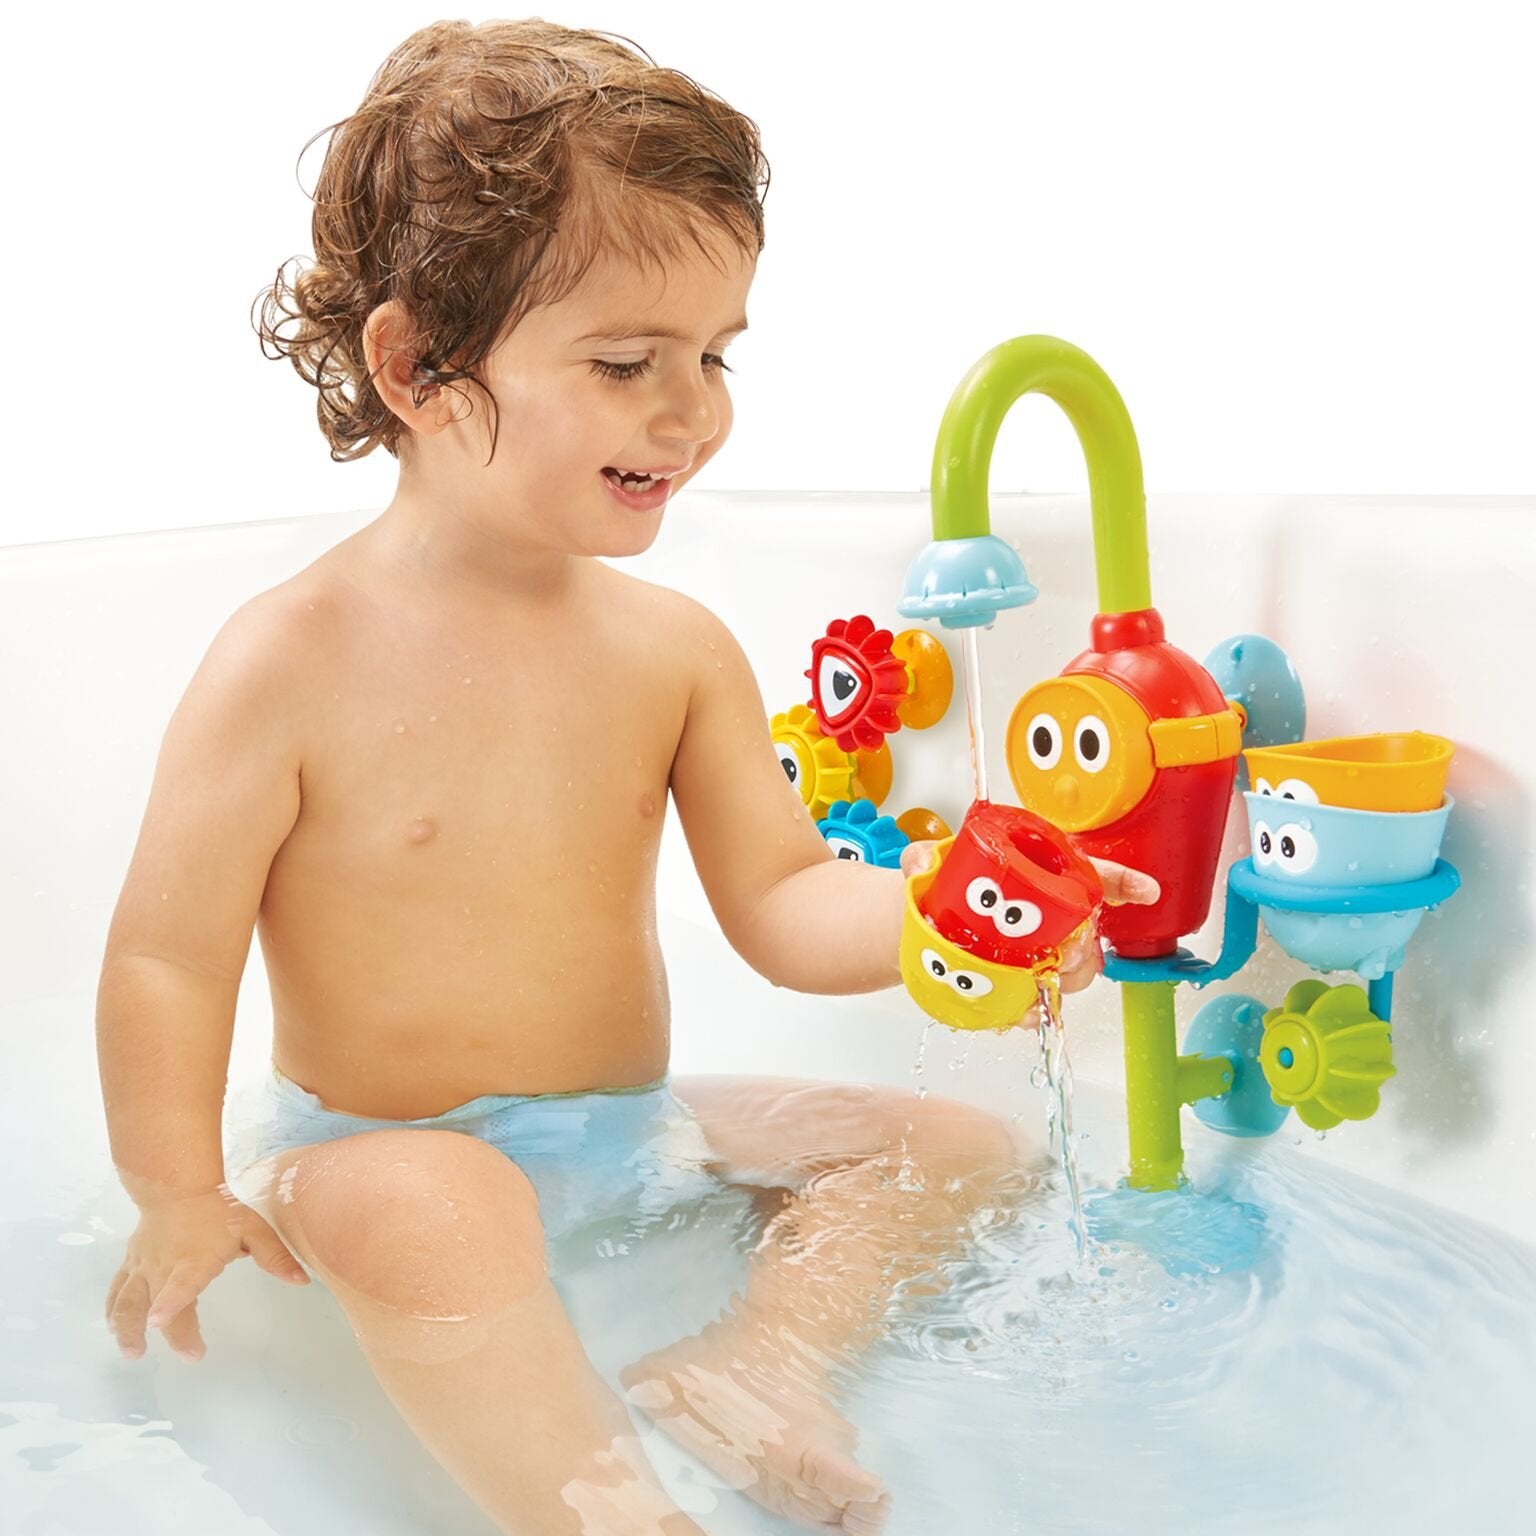 Yookidoo Bath Toys (For Toddlers 1-3) - Spin N Sort Spout Pro - 3 Stackable Cups, Hose and Spout, Spinning Suction Cups For Kids Bathtime Fun